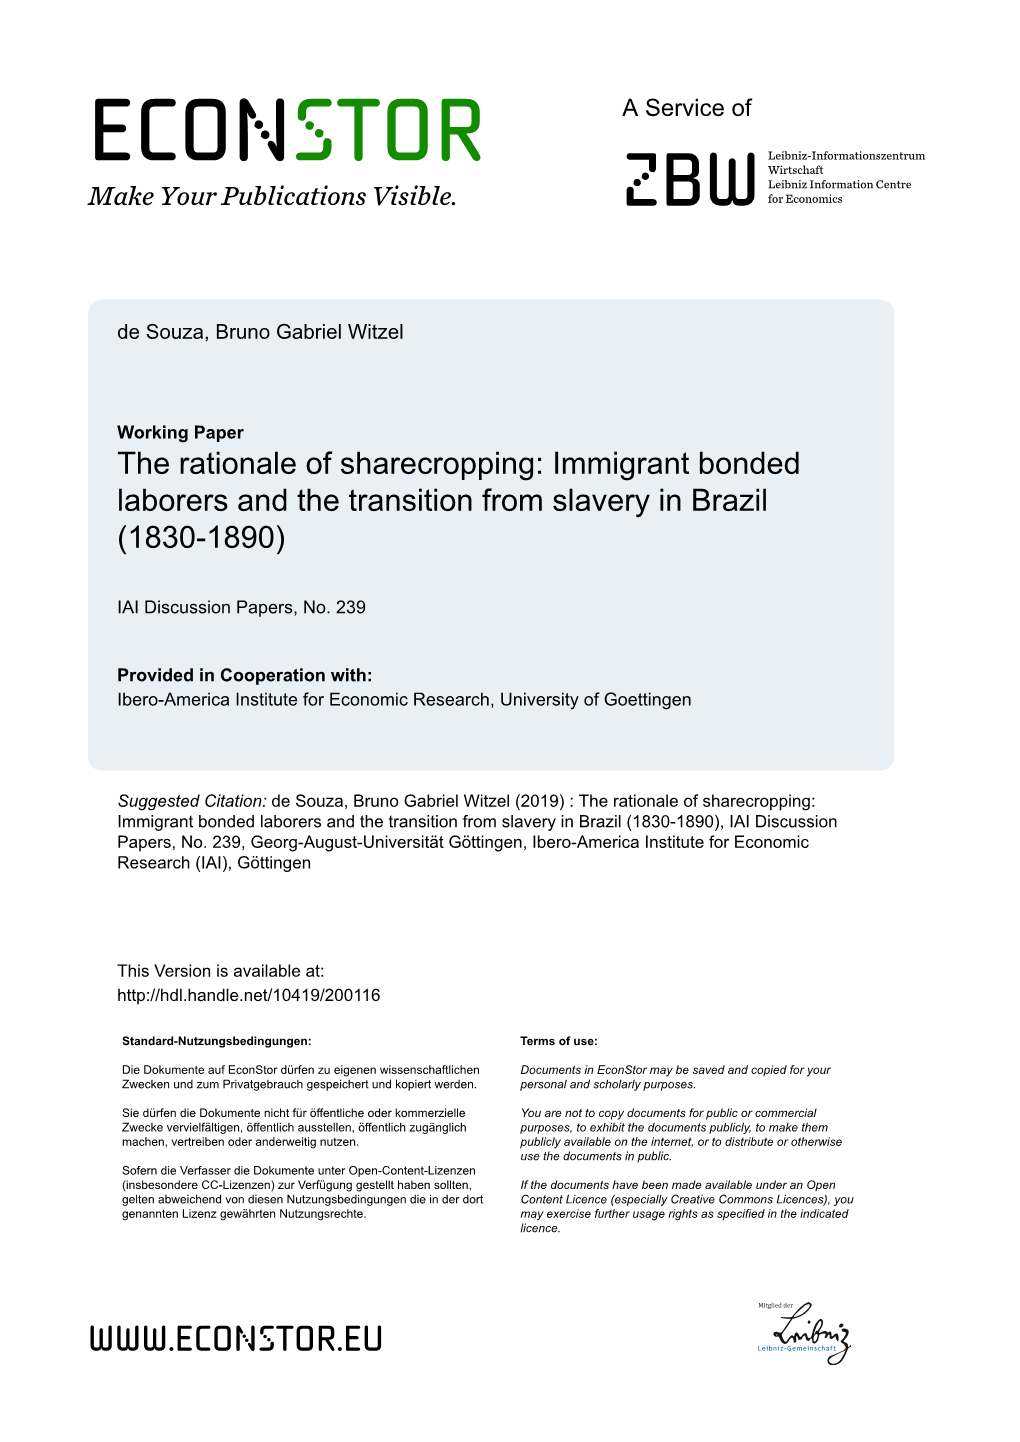 The Rationale of Sharecropping: Immigrant Bonded Laborers and the Transition from Slavery in Brazil (1830-1890)